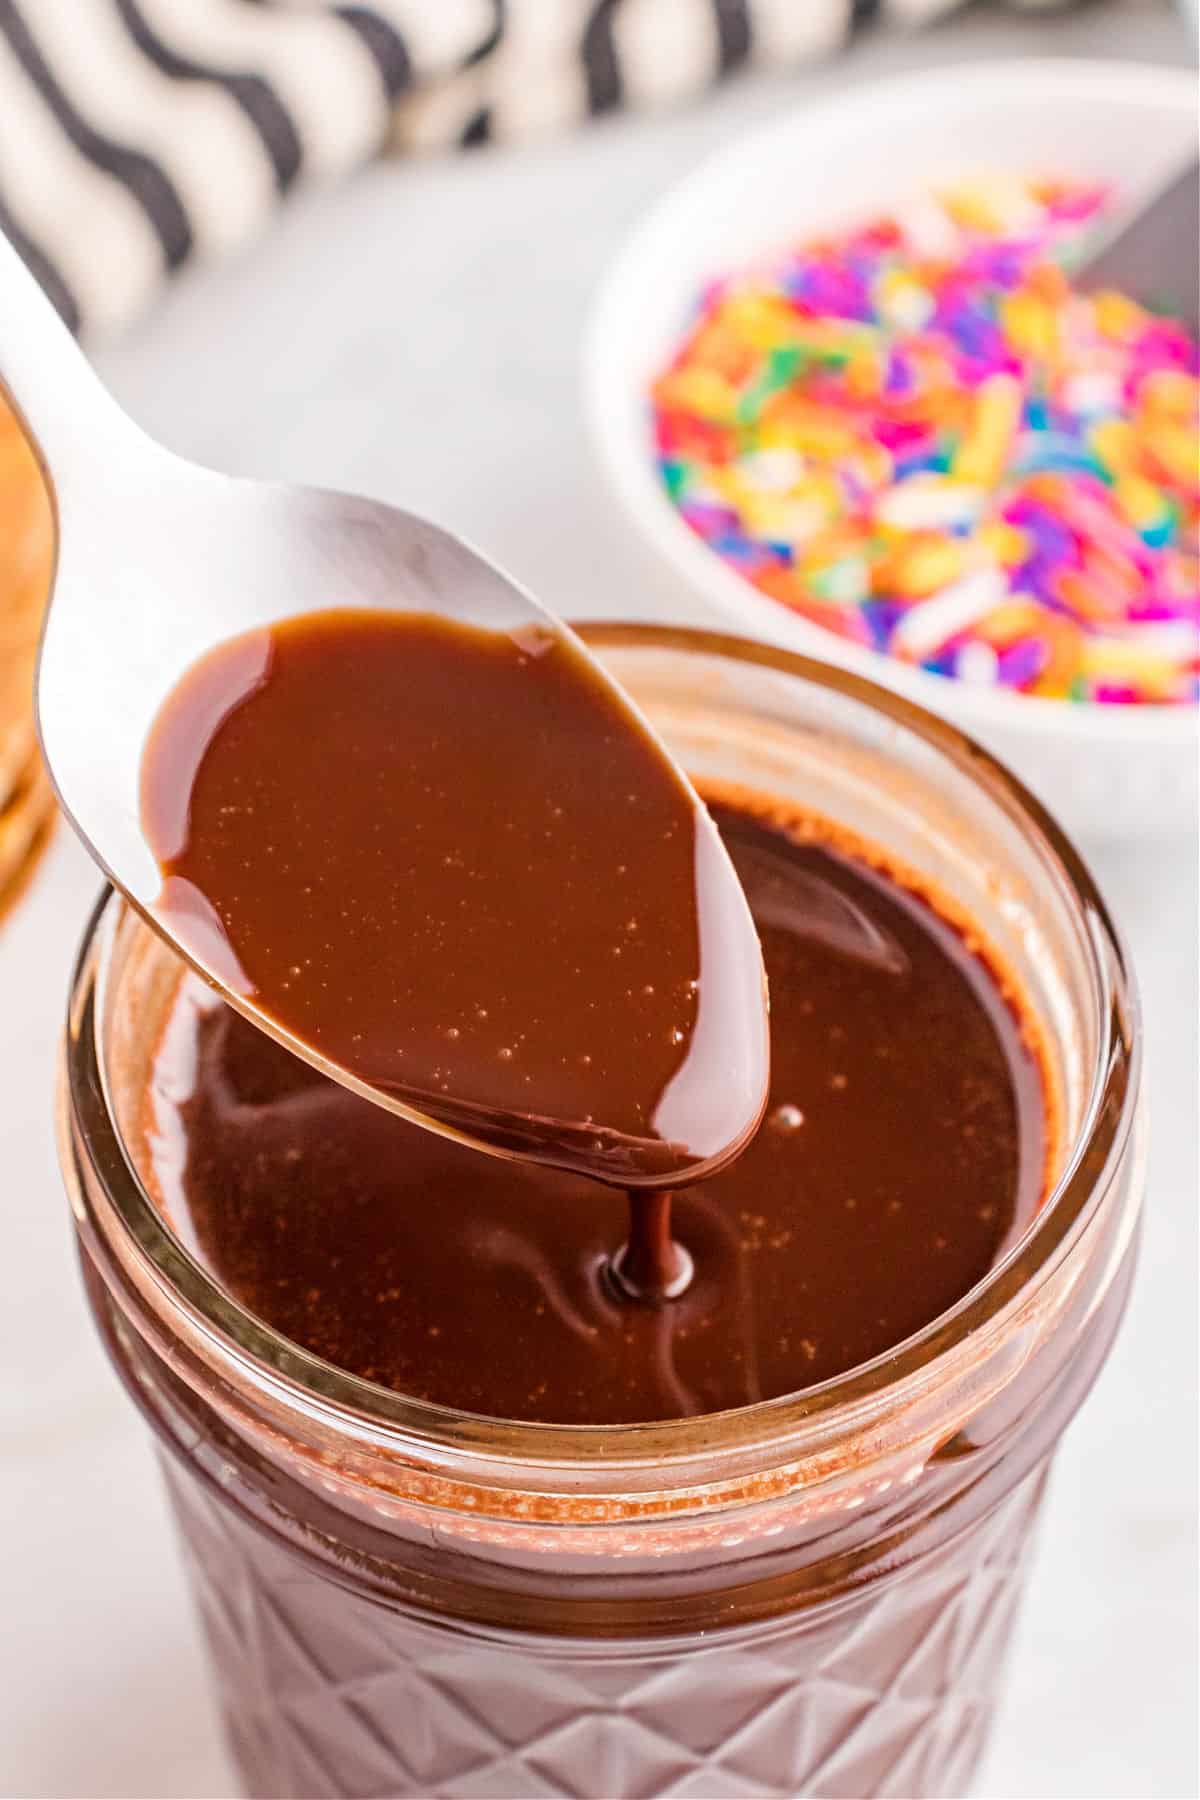 Homemade chocolate syrup in a jar with a spoon.